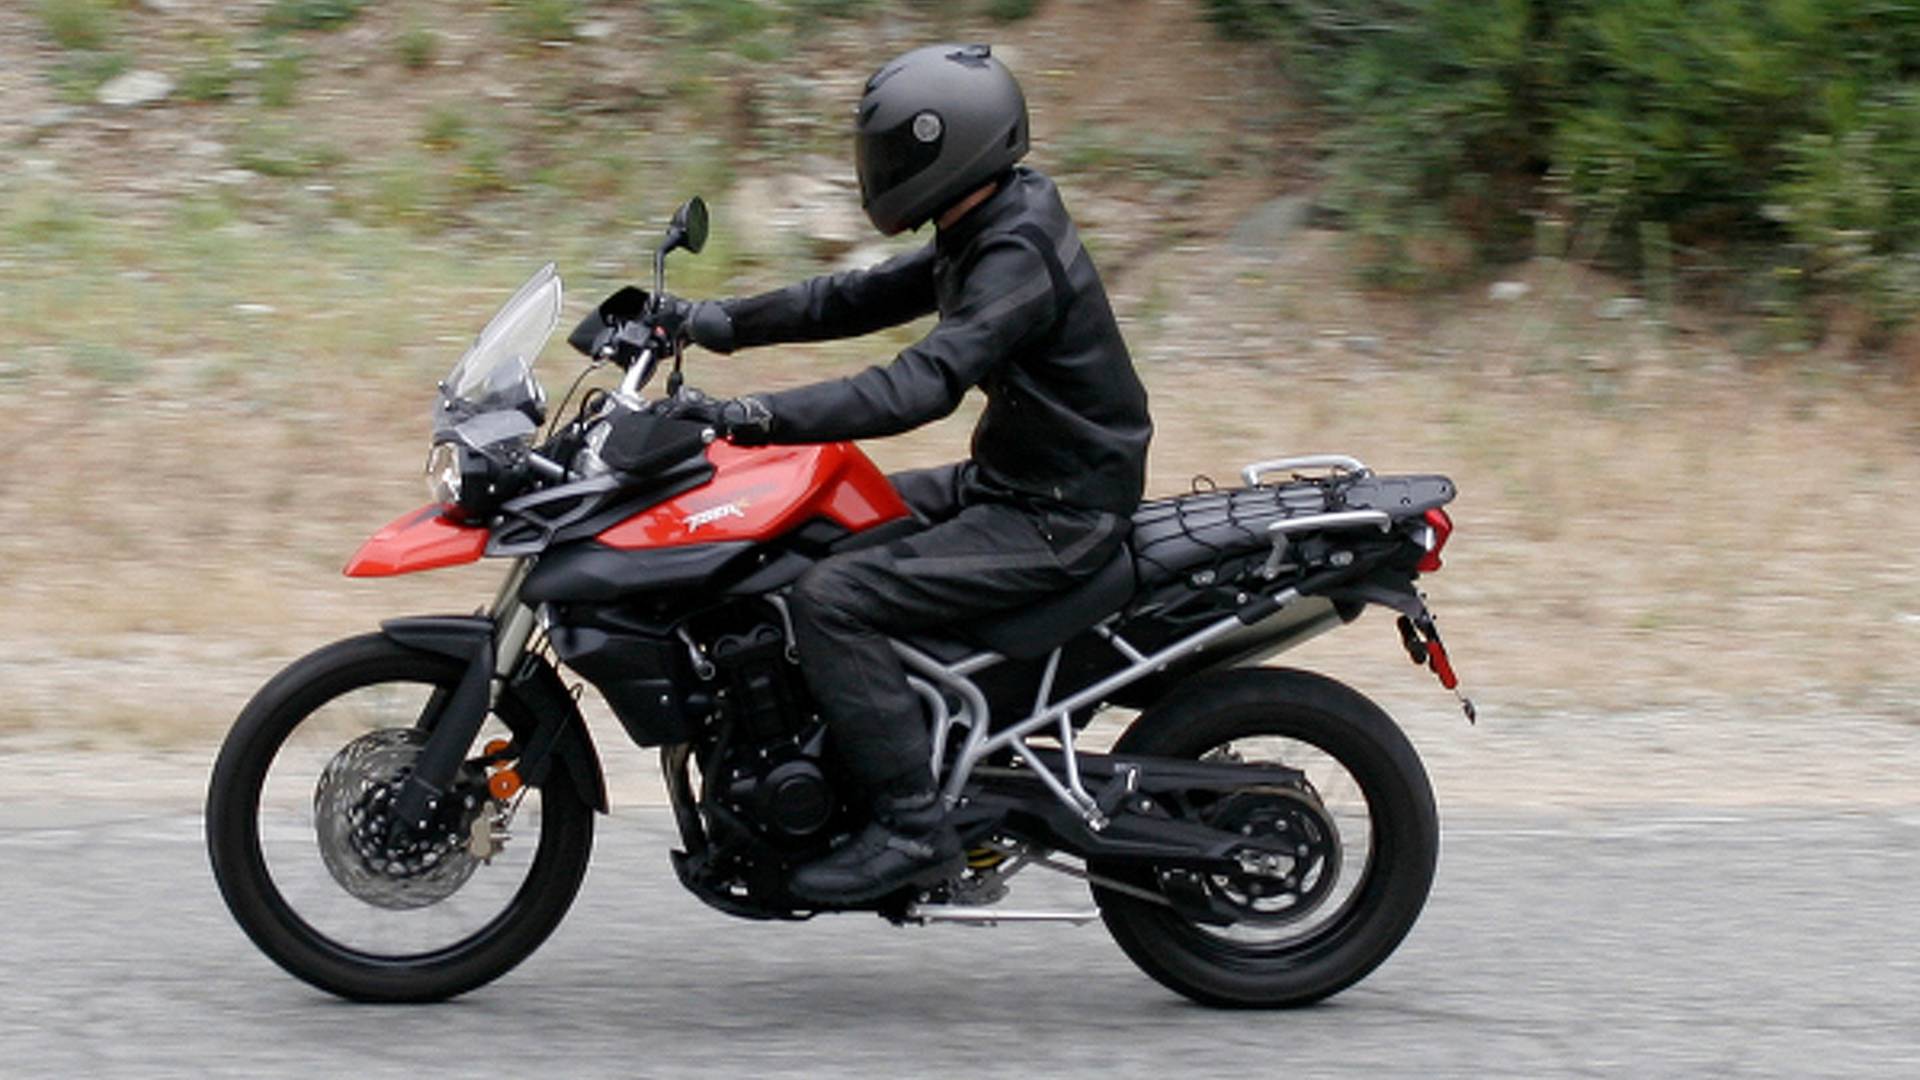 Comparing the Triumph Tiger 800 and XC